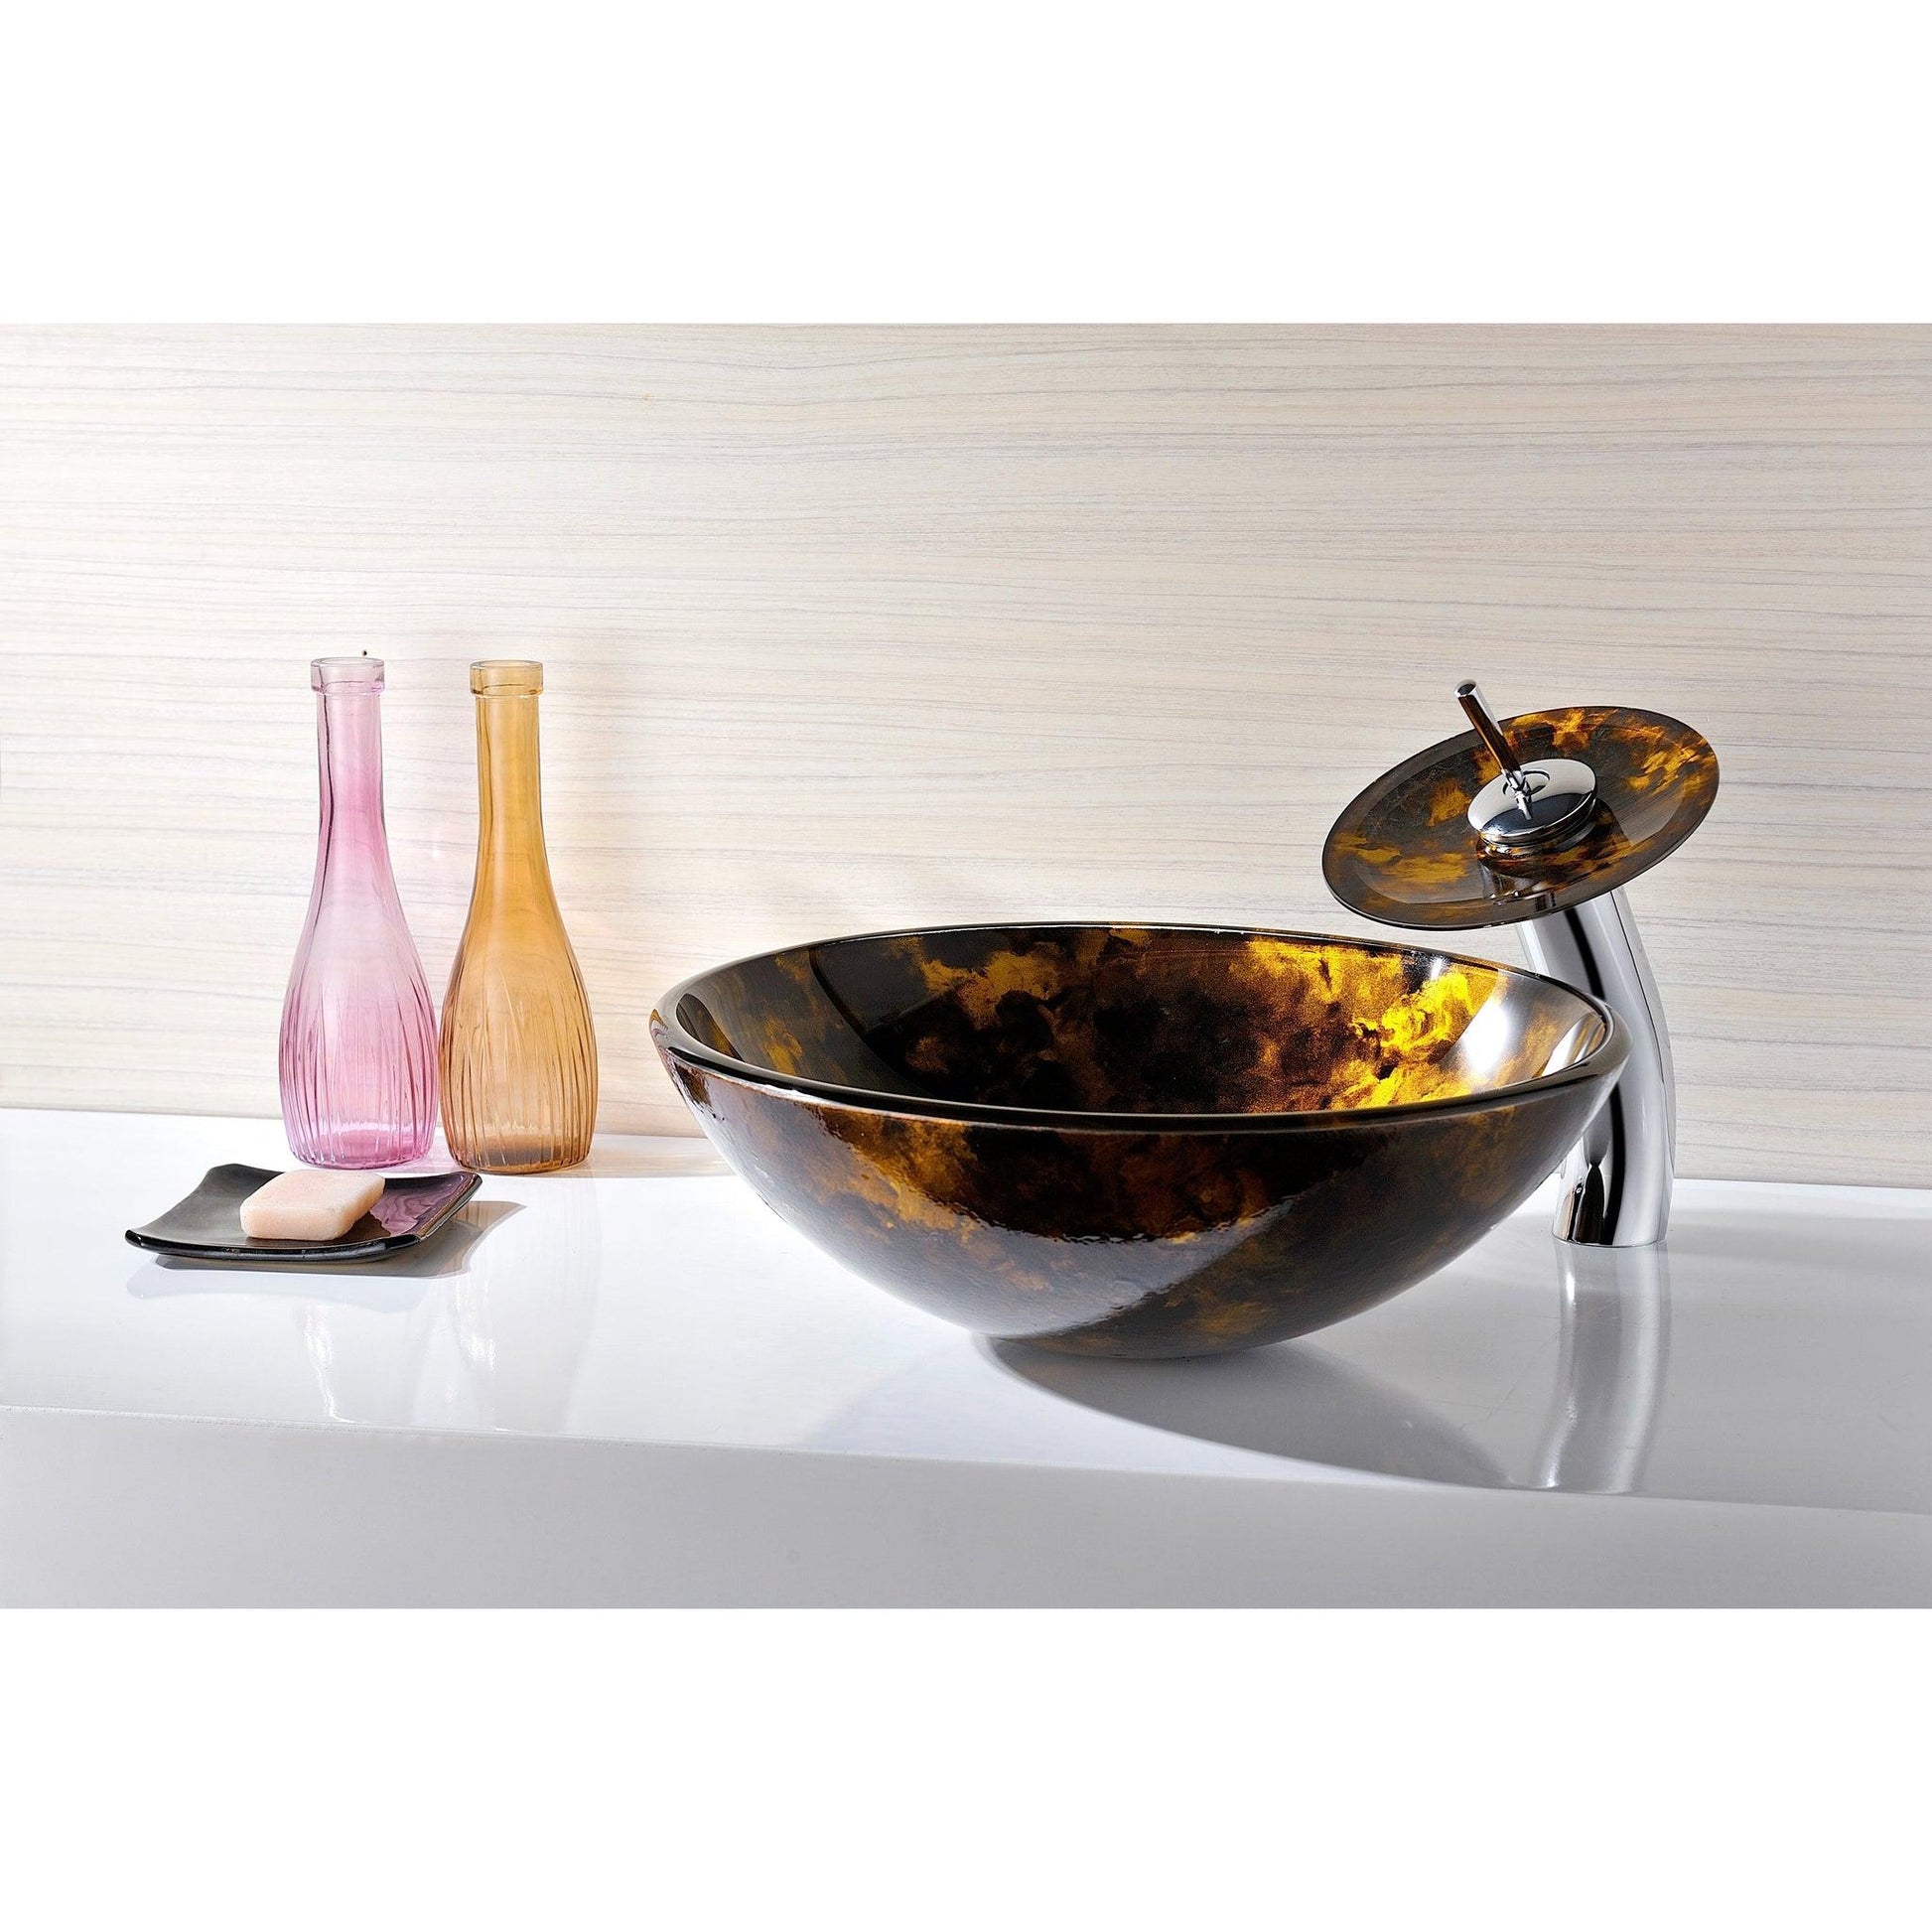 ANZZI Timbre Series 17" x 17" Round Kindled Amber Deco-Glass Vessel Sink With Polished Chrome Pop-Up Drain and Waterfall Faucet